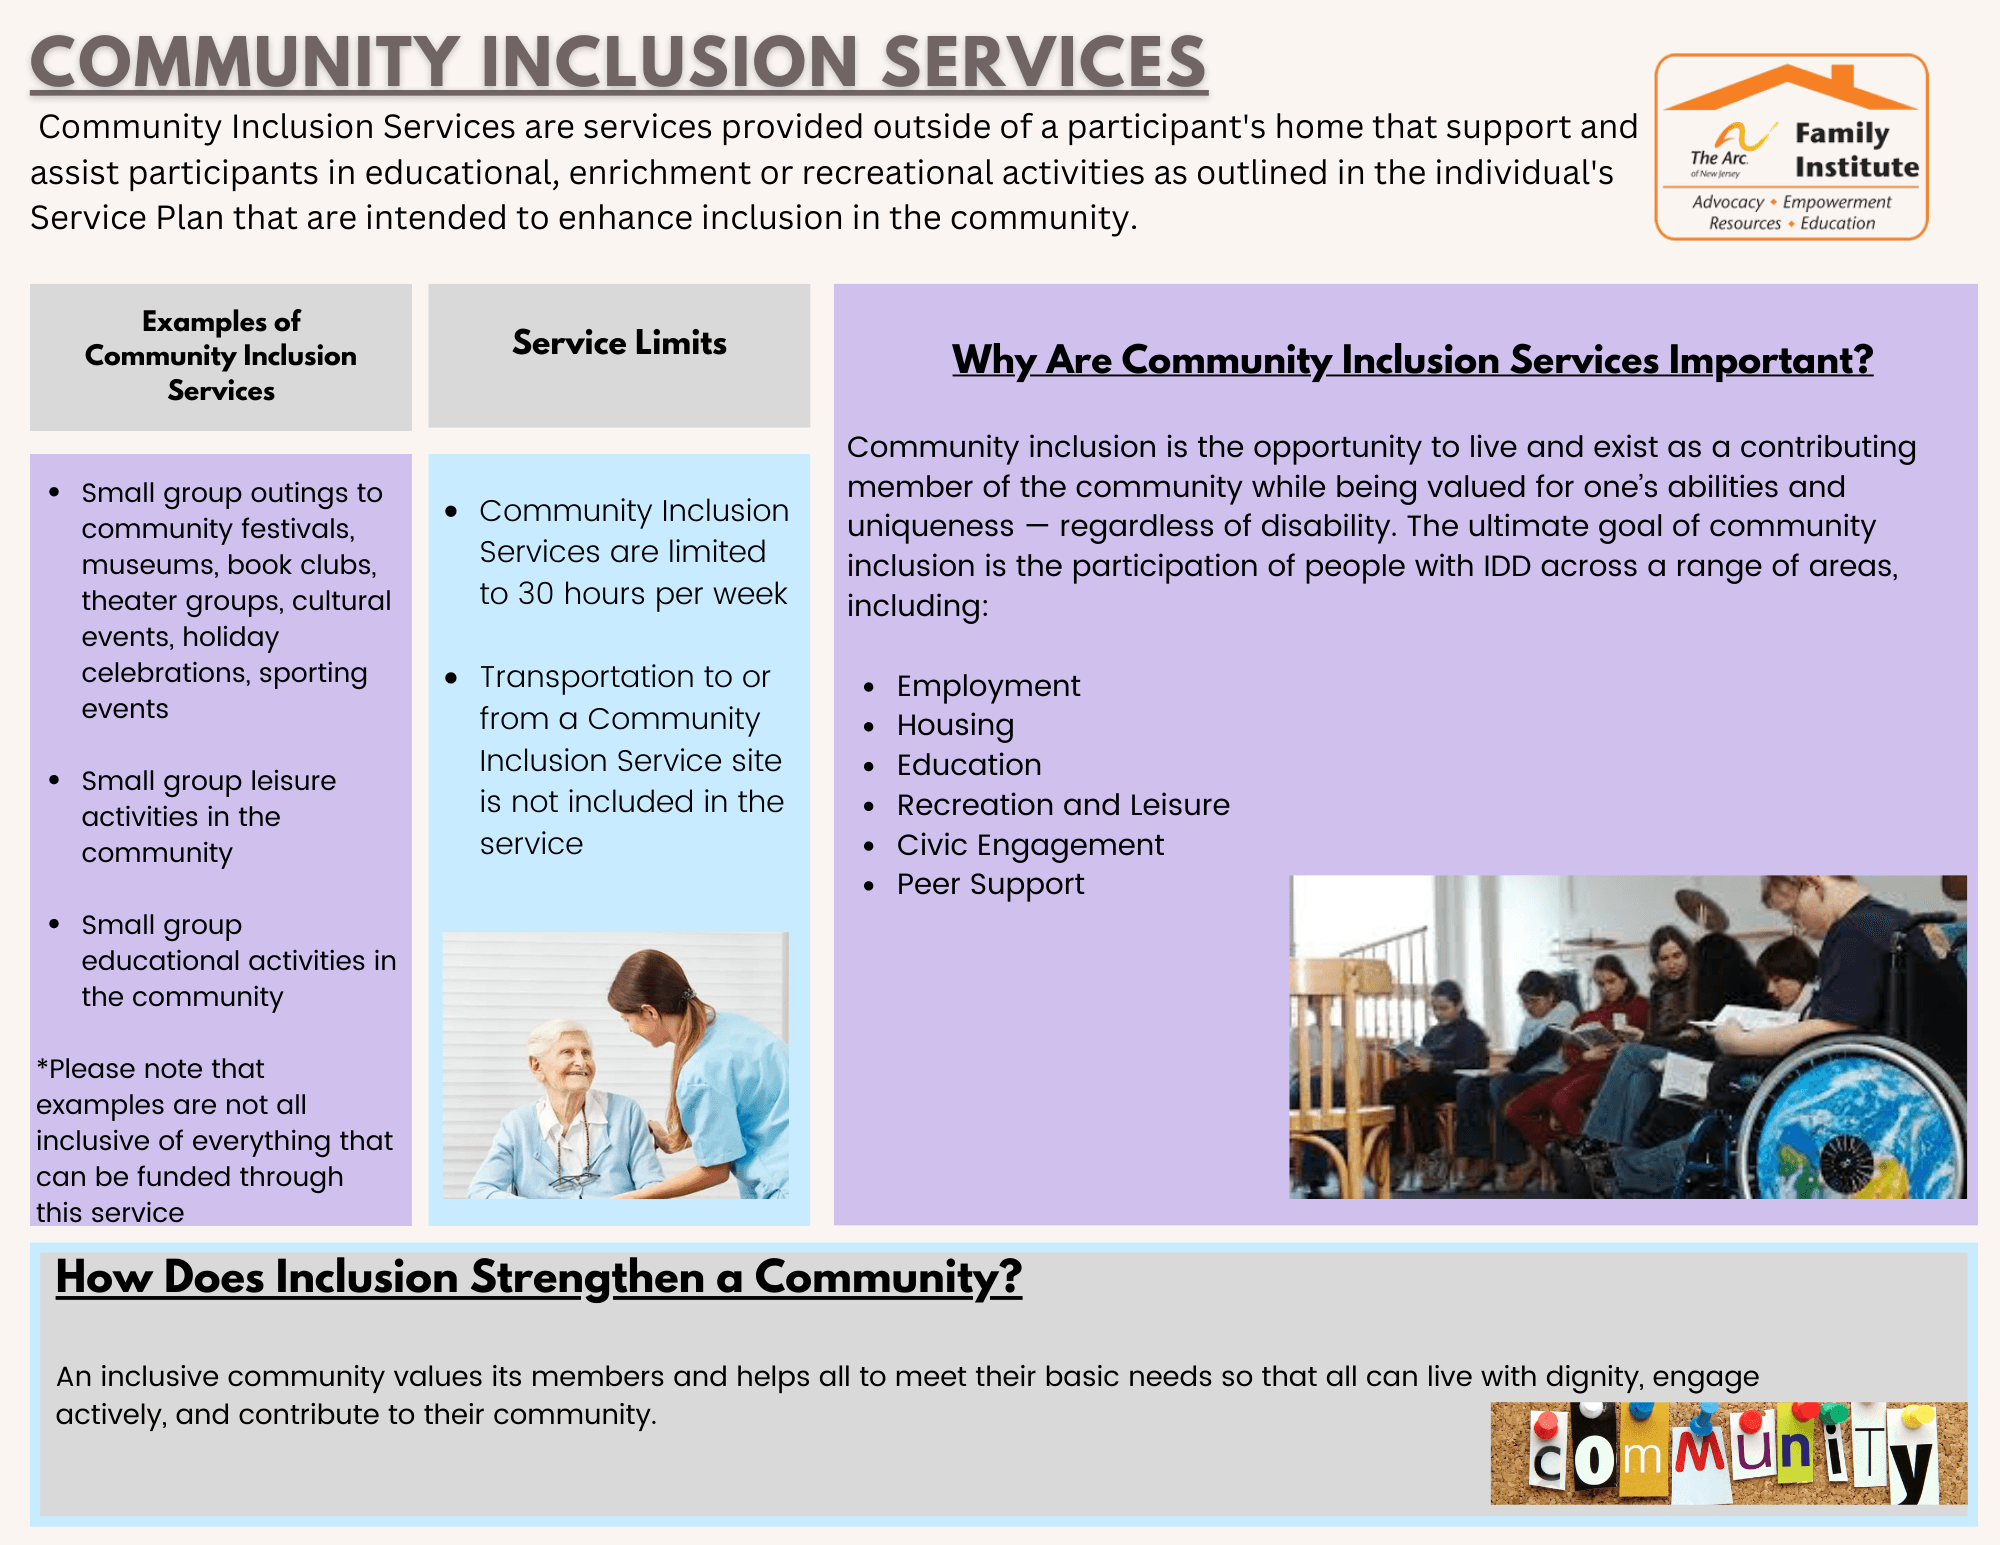 Community Inclusion Services Through the Division of Developmental Disabilities (DDD)